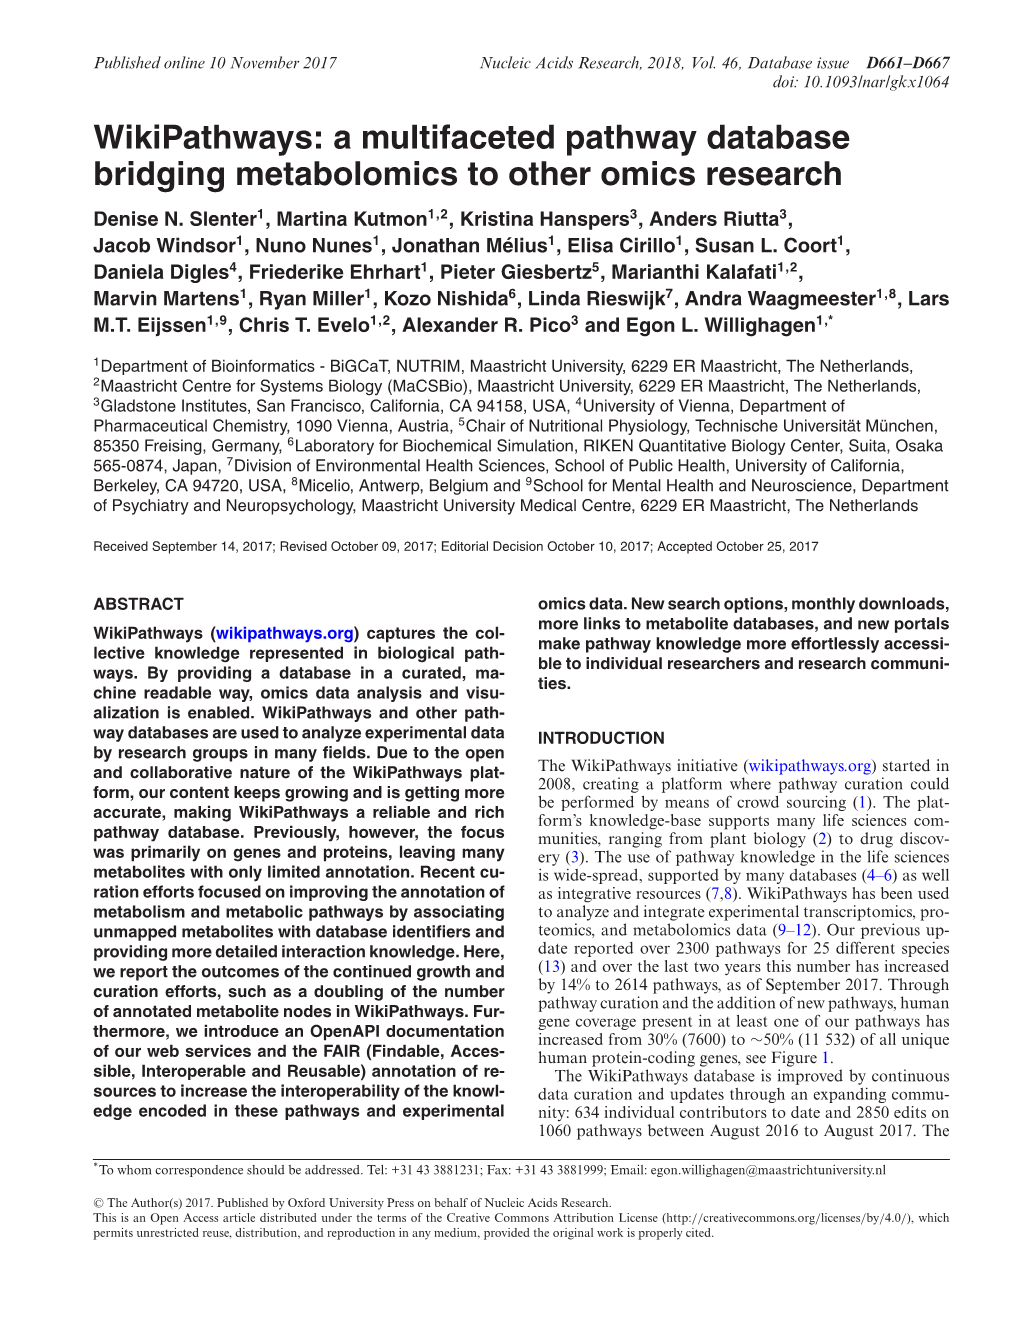 Wikipathways: a Multifaceted Pathway Database Bridging Metabolomics to Other Omics Research Denise N